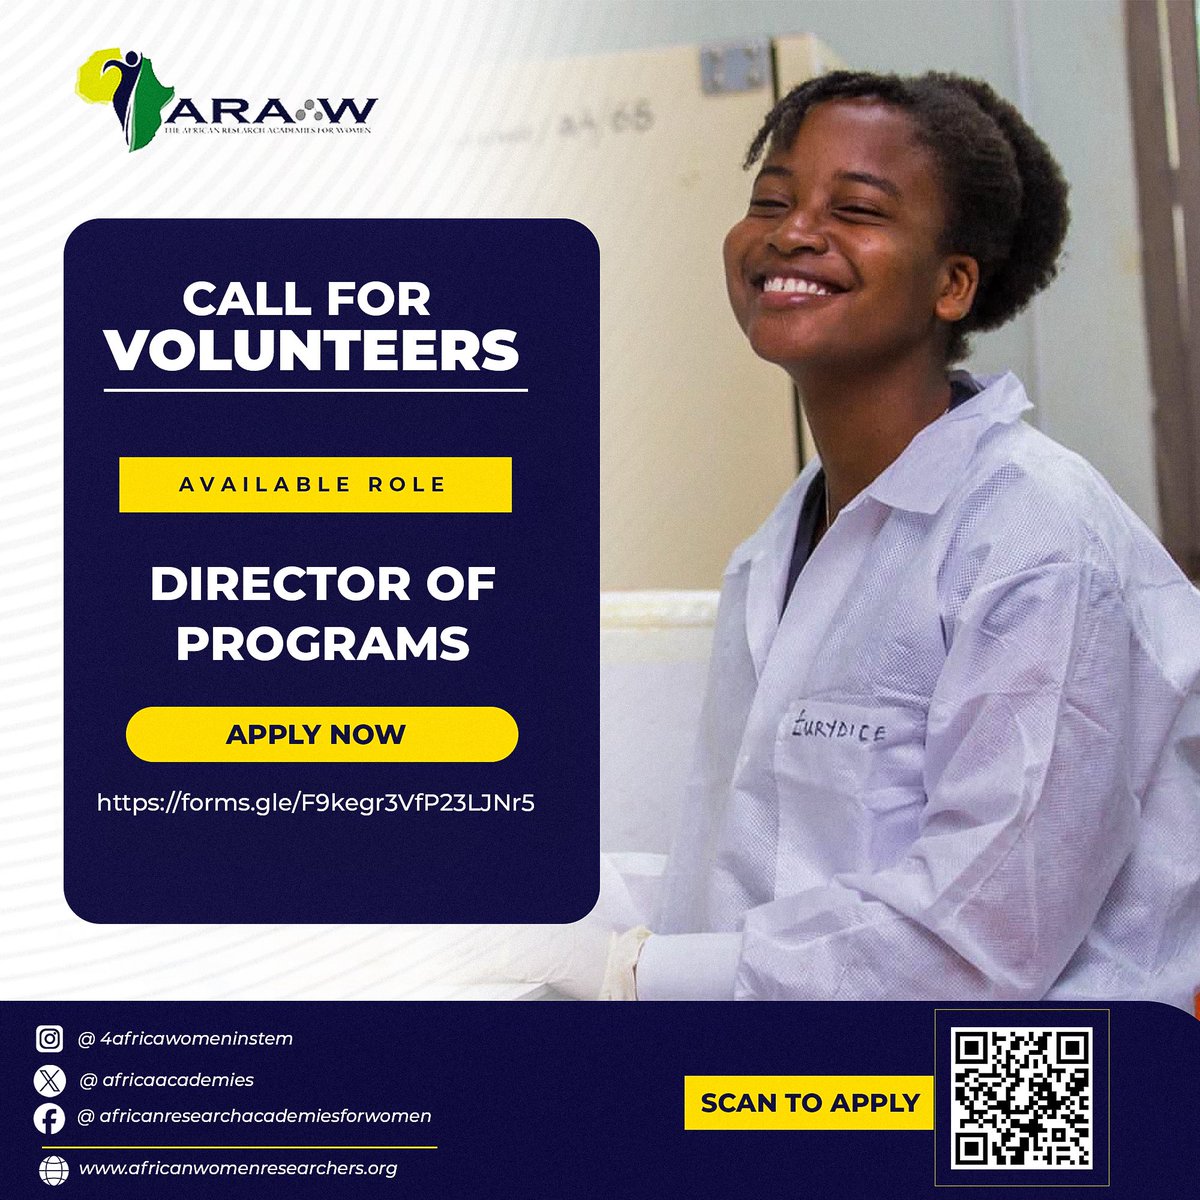 ARA-W is looking for volunteers to fill the roles below. You may apply via lnkd.in/enWQMJAF or email your CV and interest to info@africanwomenresearchers.org Come join our team to contribute to REAL CHANGE!!!